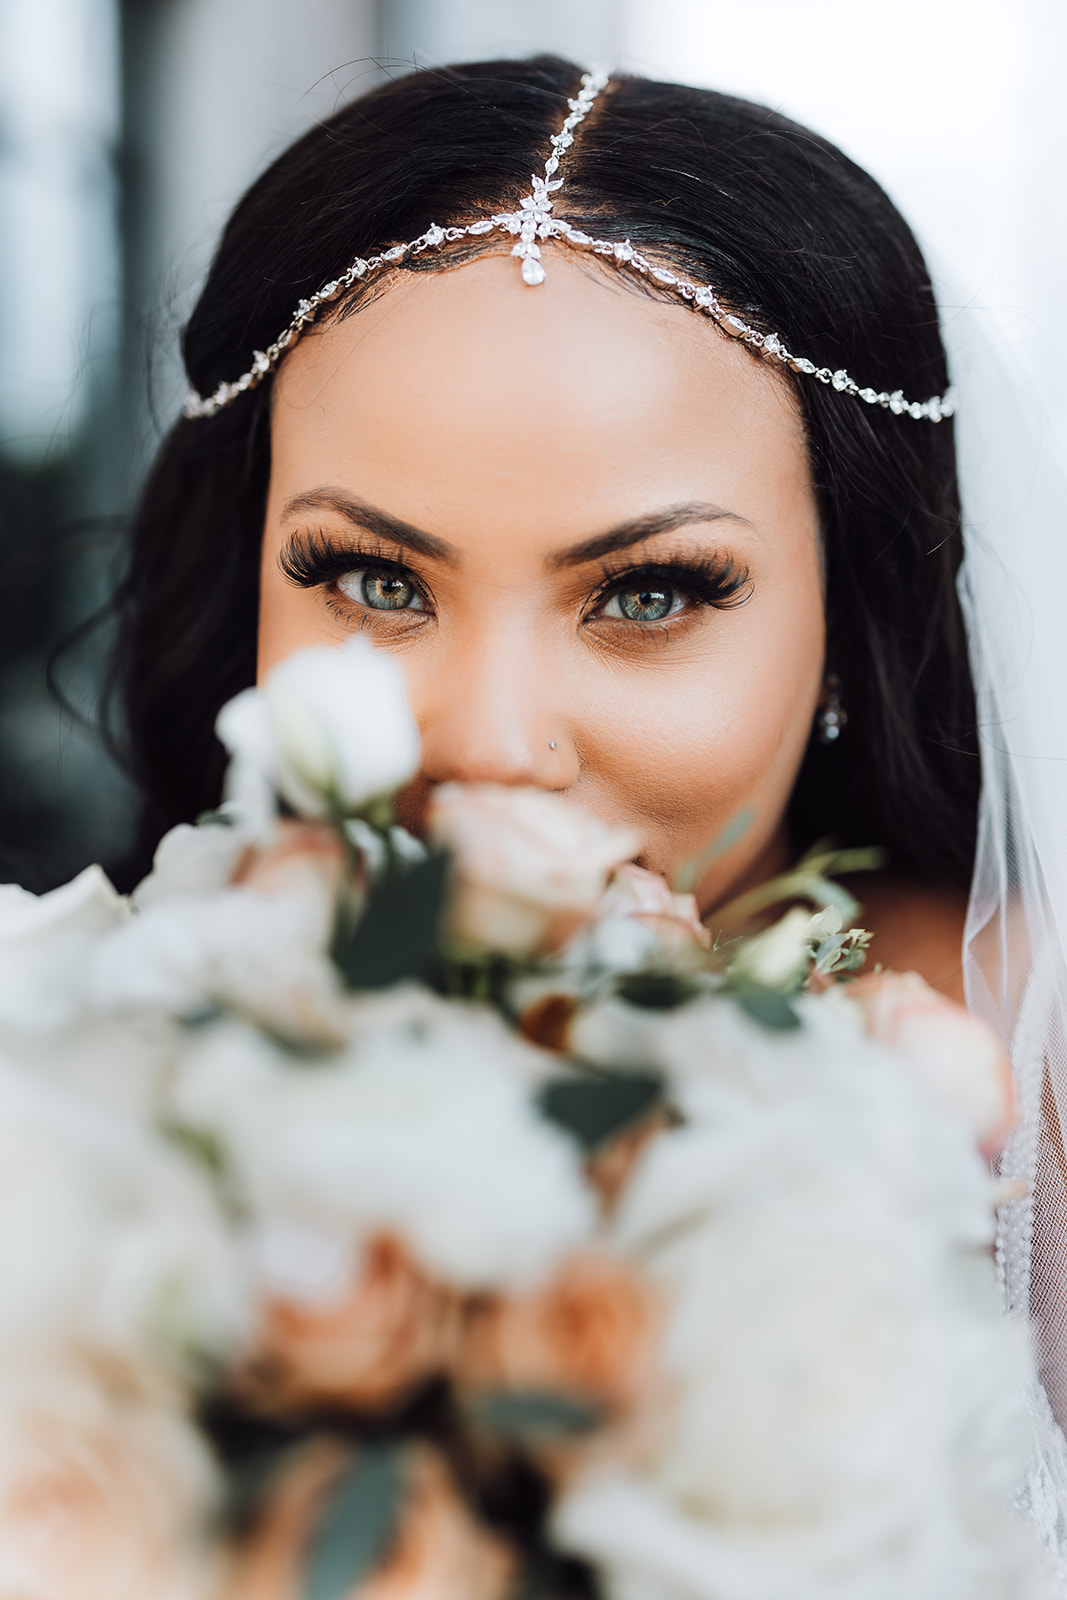 Details of a bride looking over her flowers with a diamond headpiece